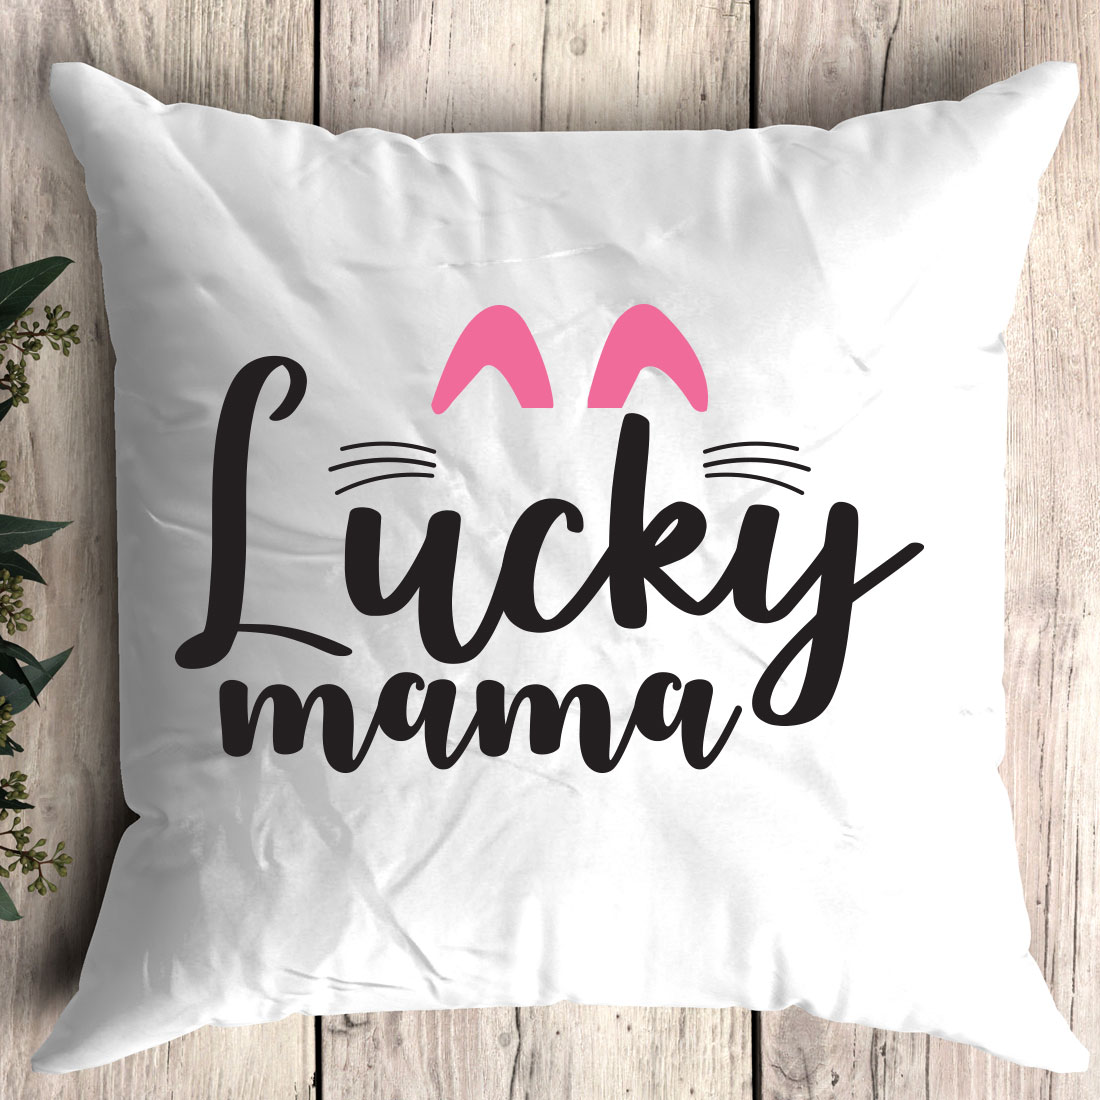 White pillow with the words lucky mama printed on it.